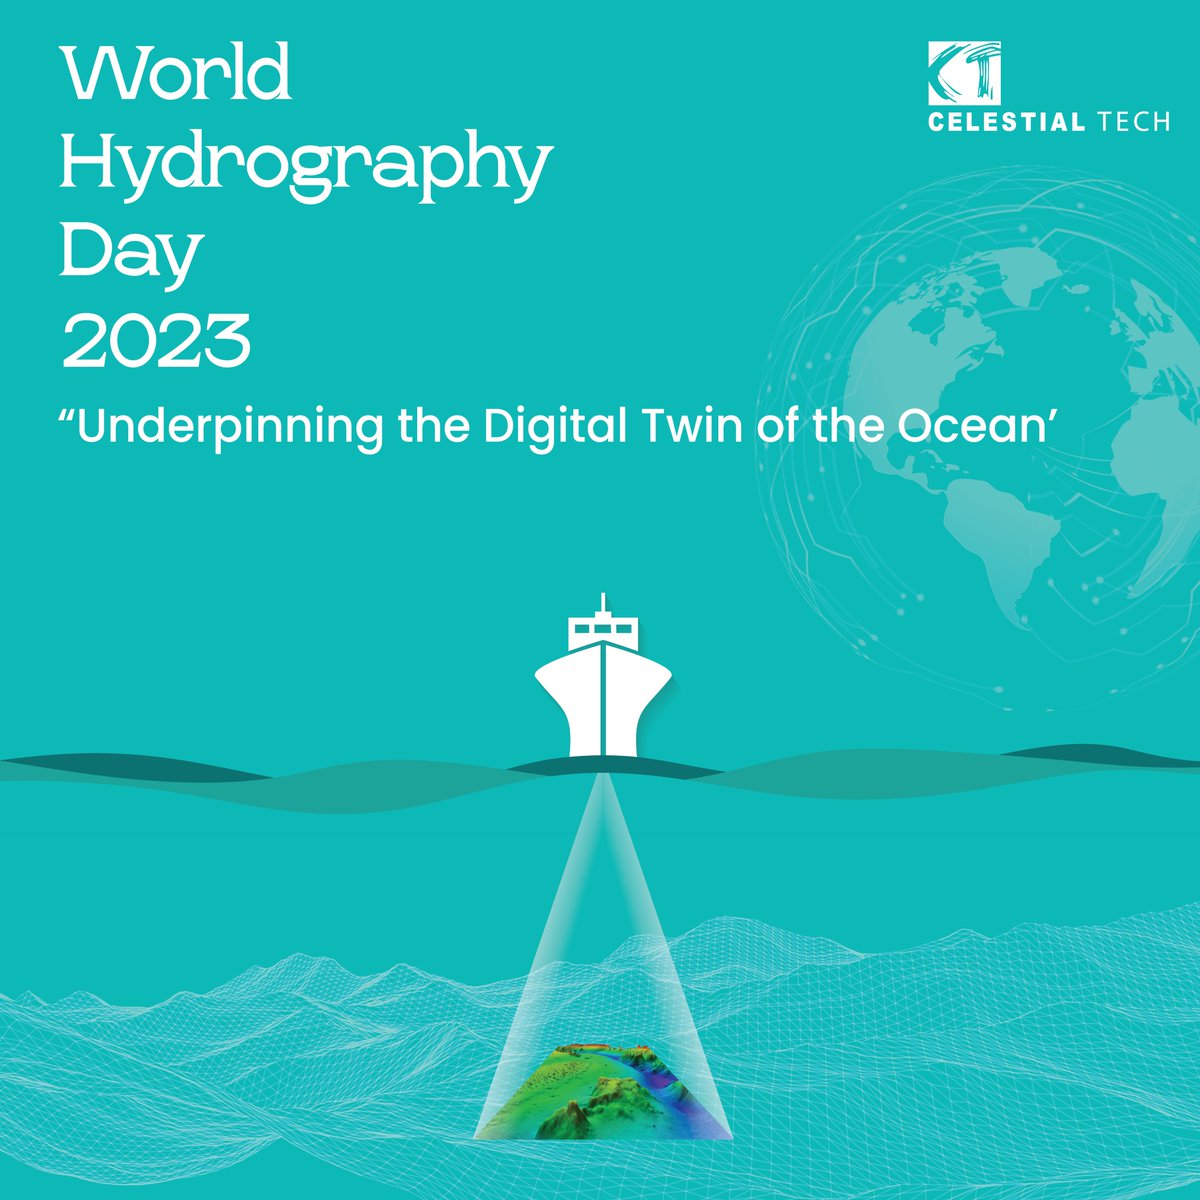 'Diving into the Digital Twin of Our Oceans: Celebrating World Hydrography Day, Unleashing the Power of Technology to Map and Protect Our Marine Realm'
#worldhydrographyday #celestialtech #DigitalTwins